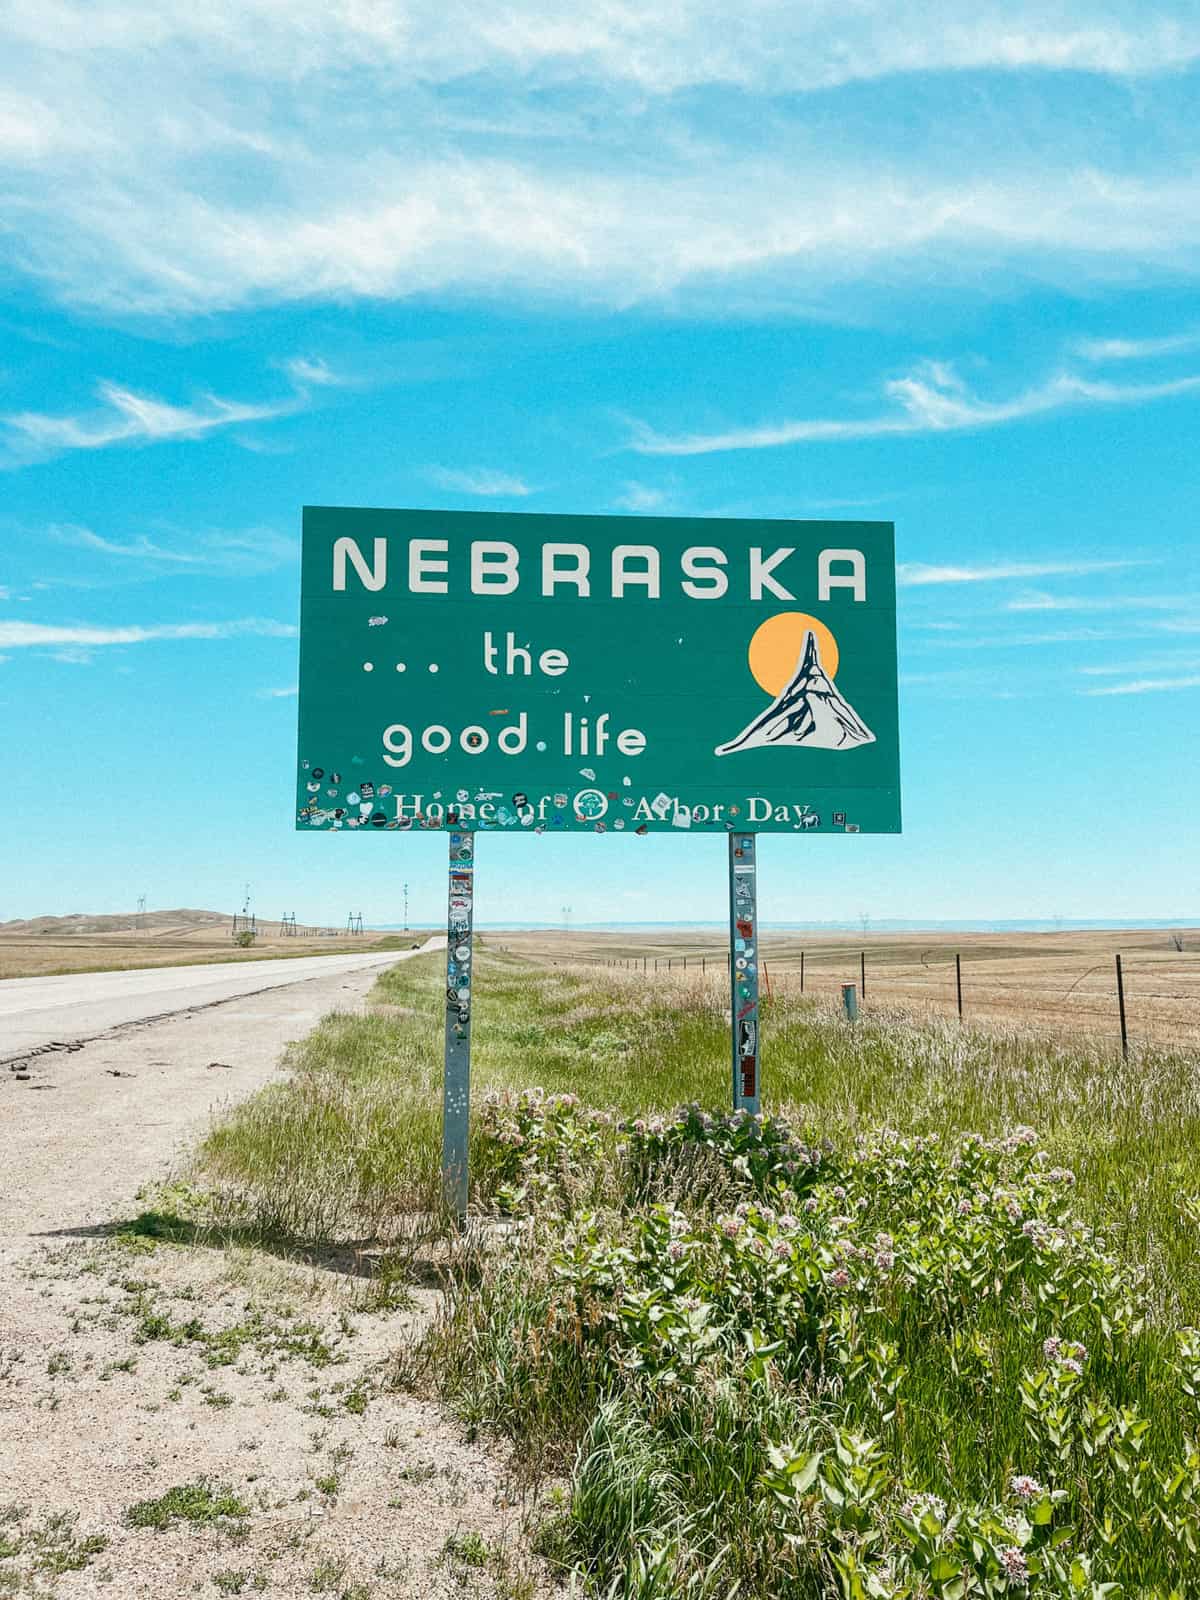 The Nebraska welcome sign with blue skies.